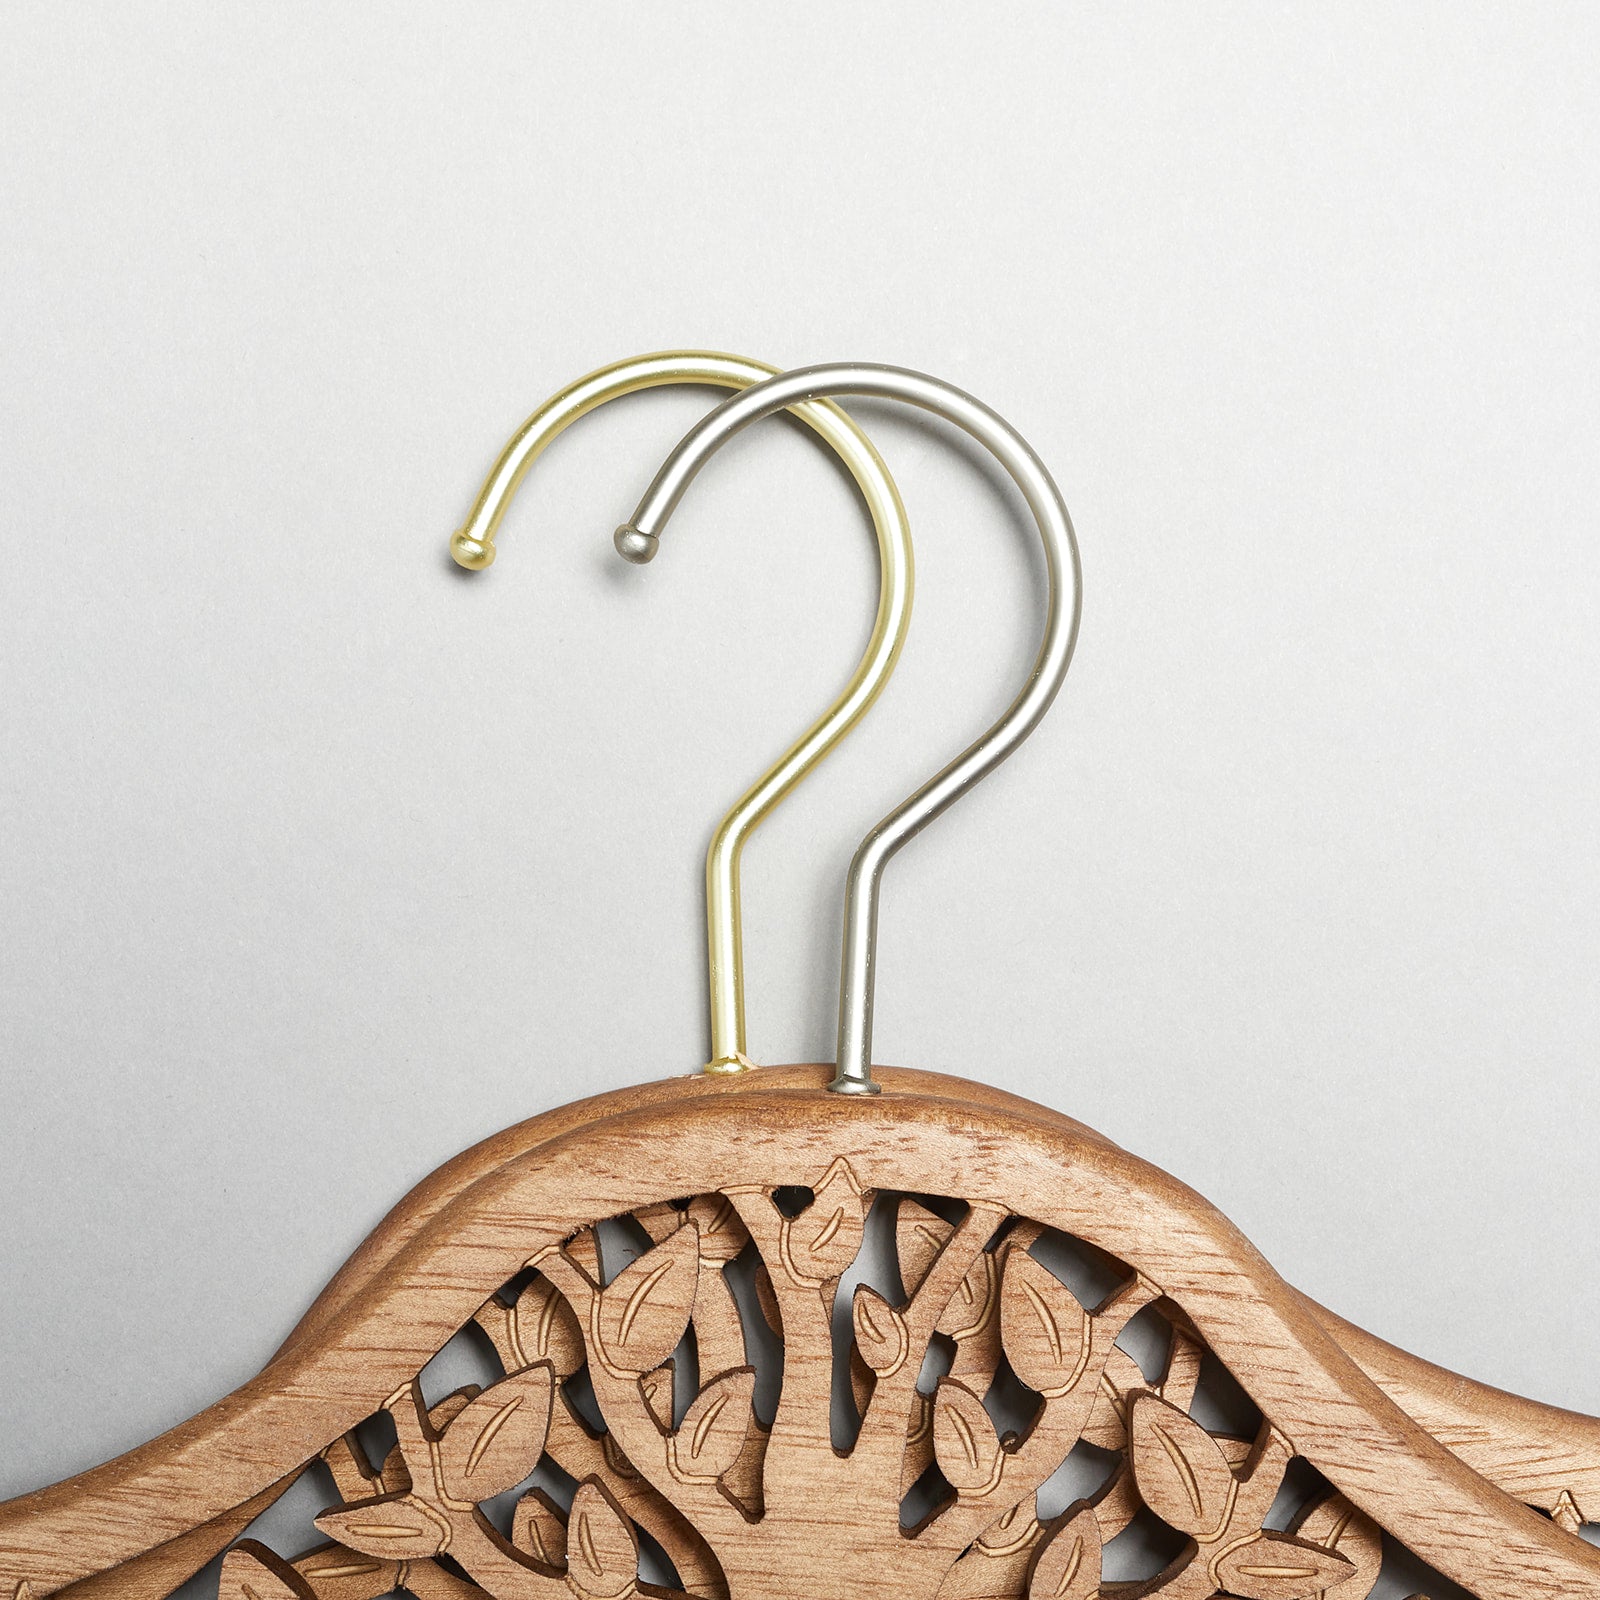 Top Quality Wood Personalized Wooden Clothes Hangers with Golden